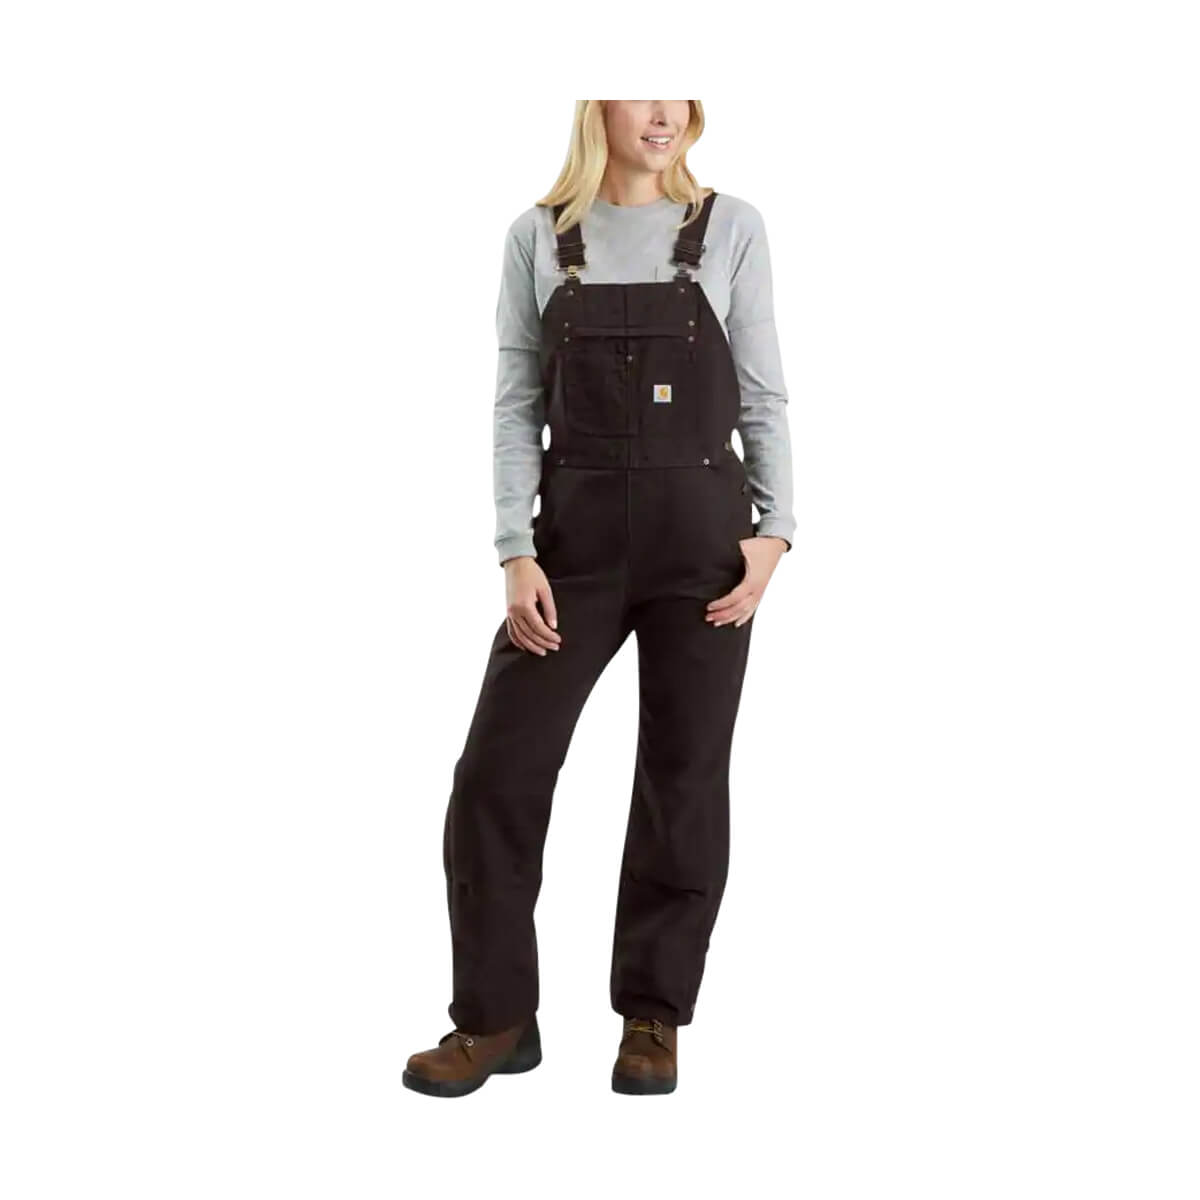 Carhartt Women's Relaxed Fit Washed Duck Insulated Bib Overall - Dark Brown